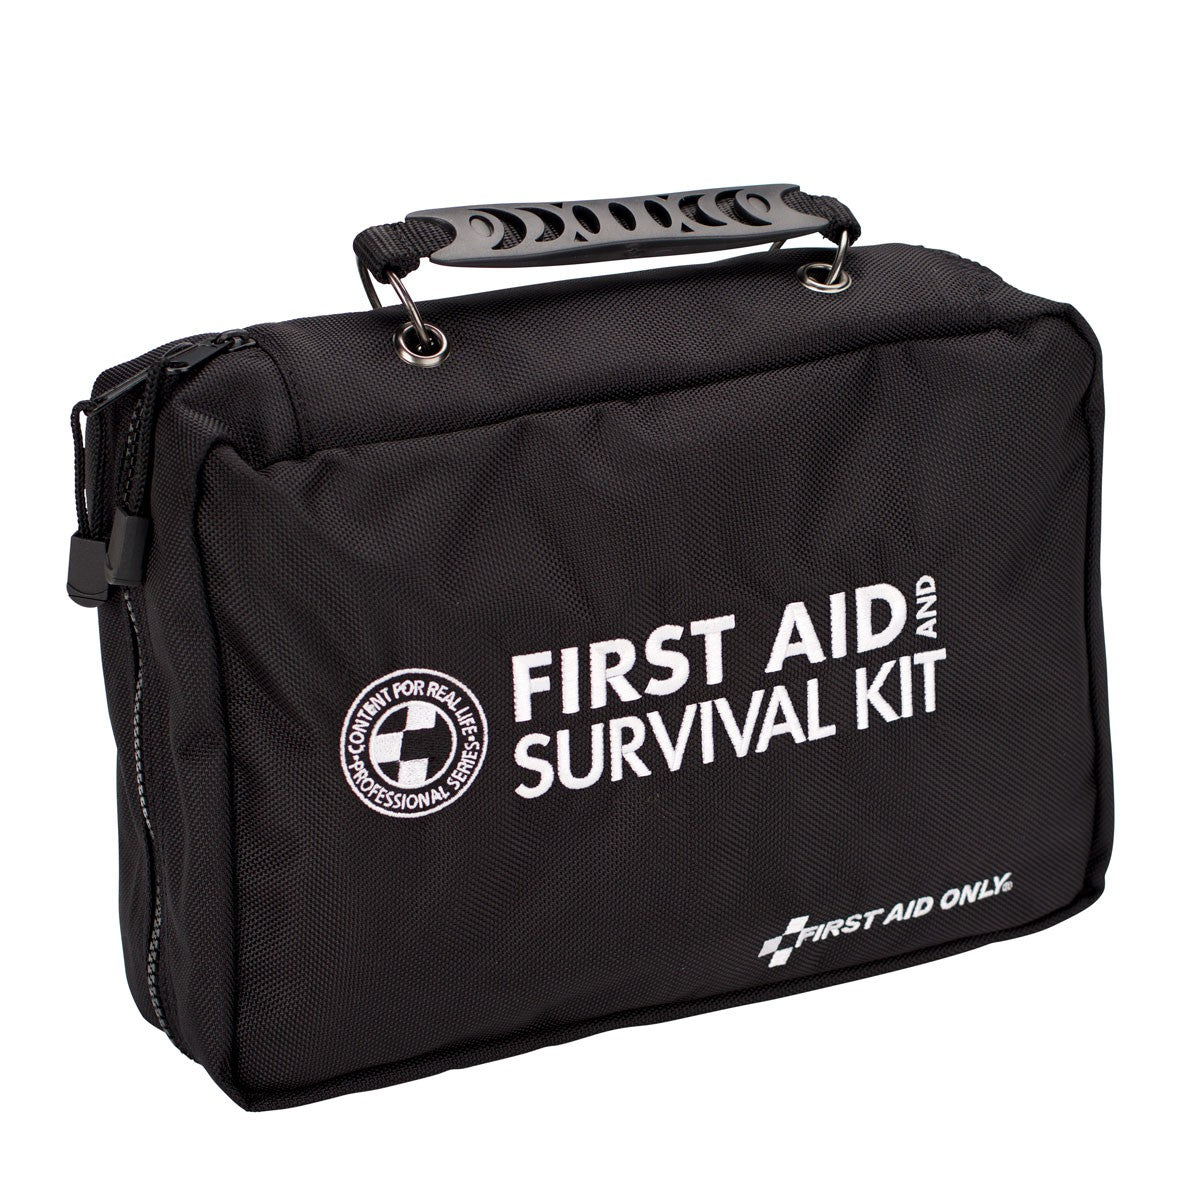 Deluxe Survival First Aid Kit In Ballistic Nylon Black Carry Case, 223 Pieces  - W-FA-462